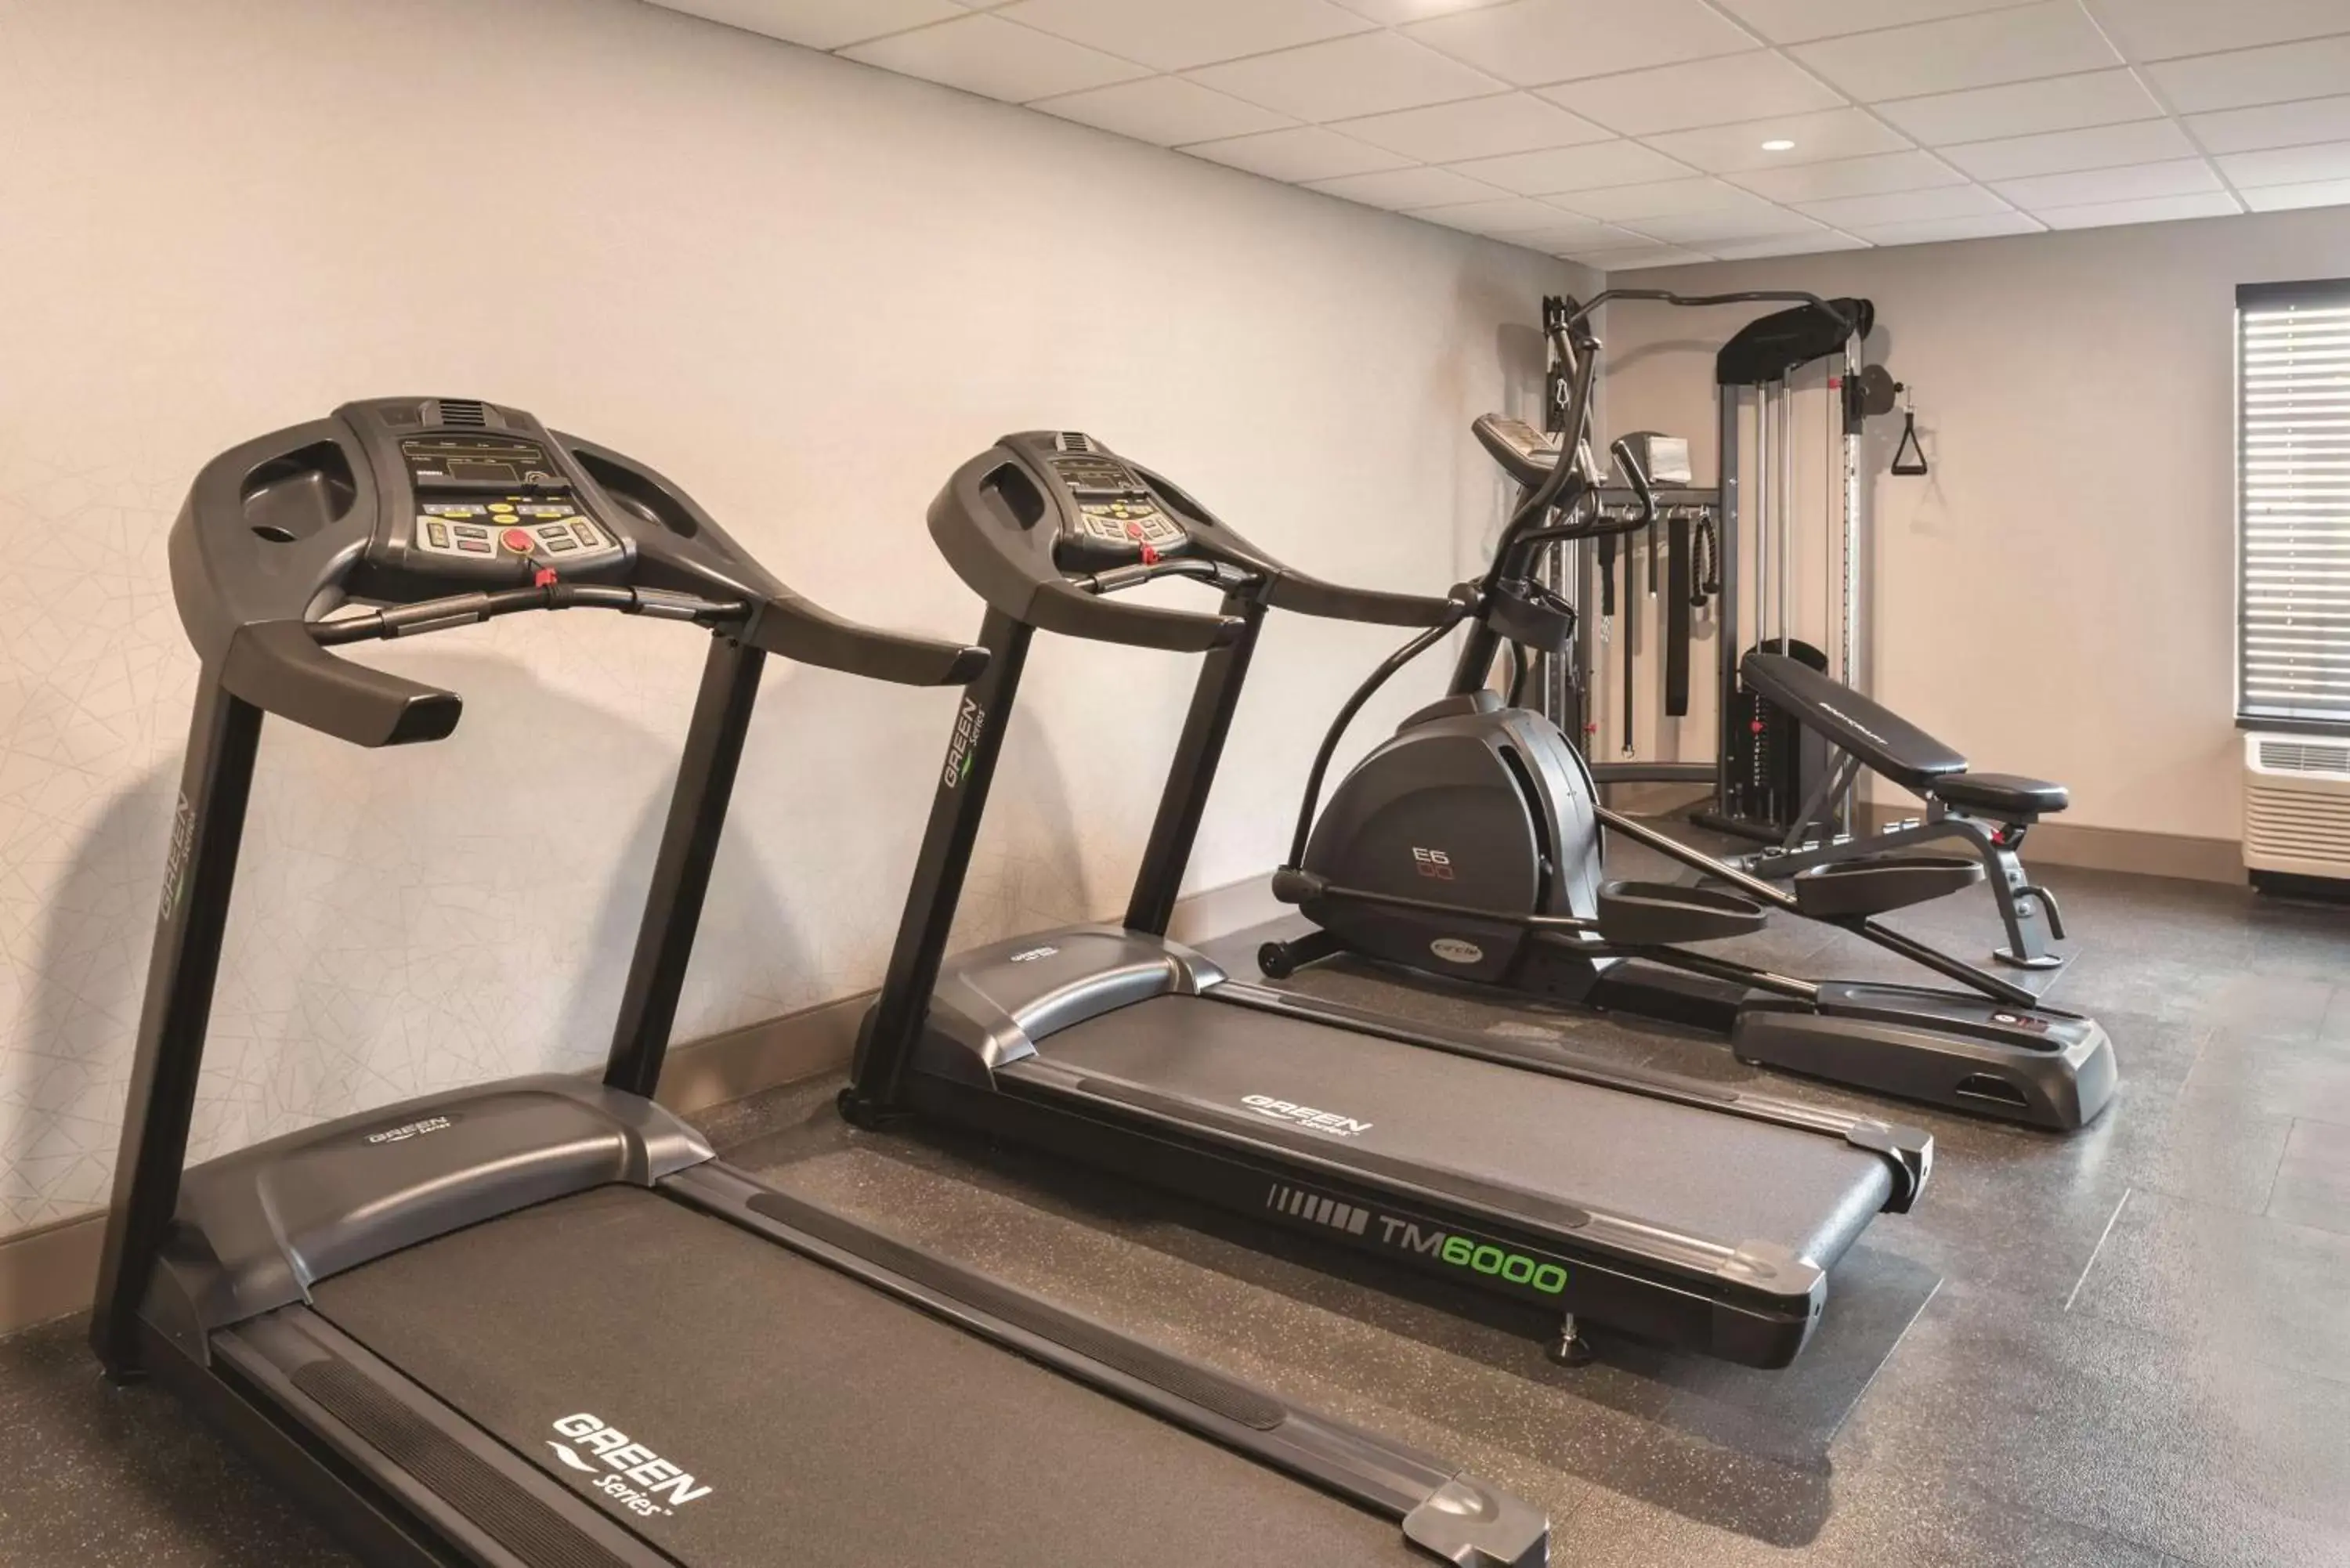 Activities, Fitness Center/Facilities in Country Inn & Suites by Radisson, La Crosse, WI